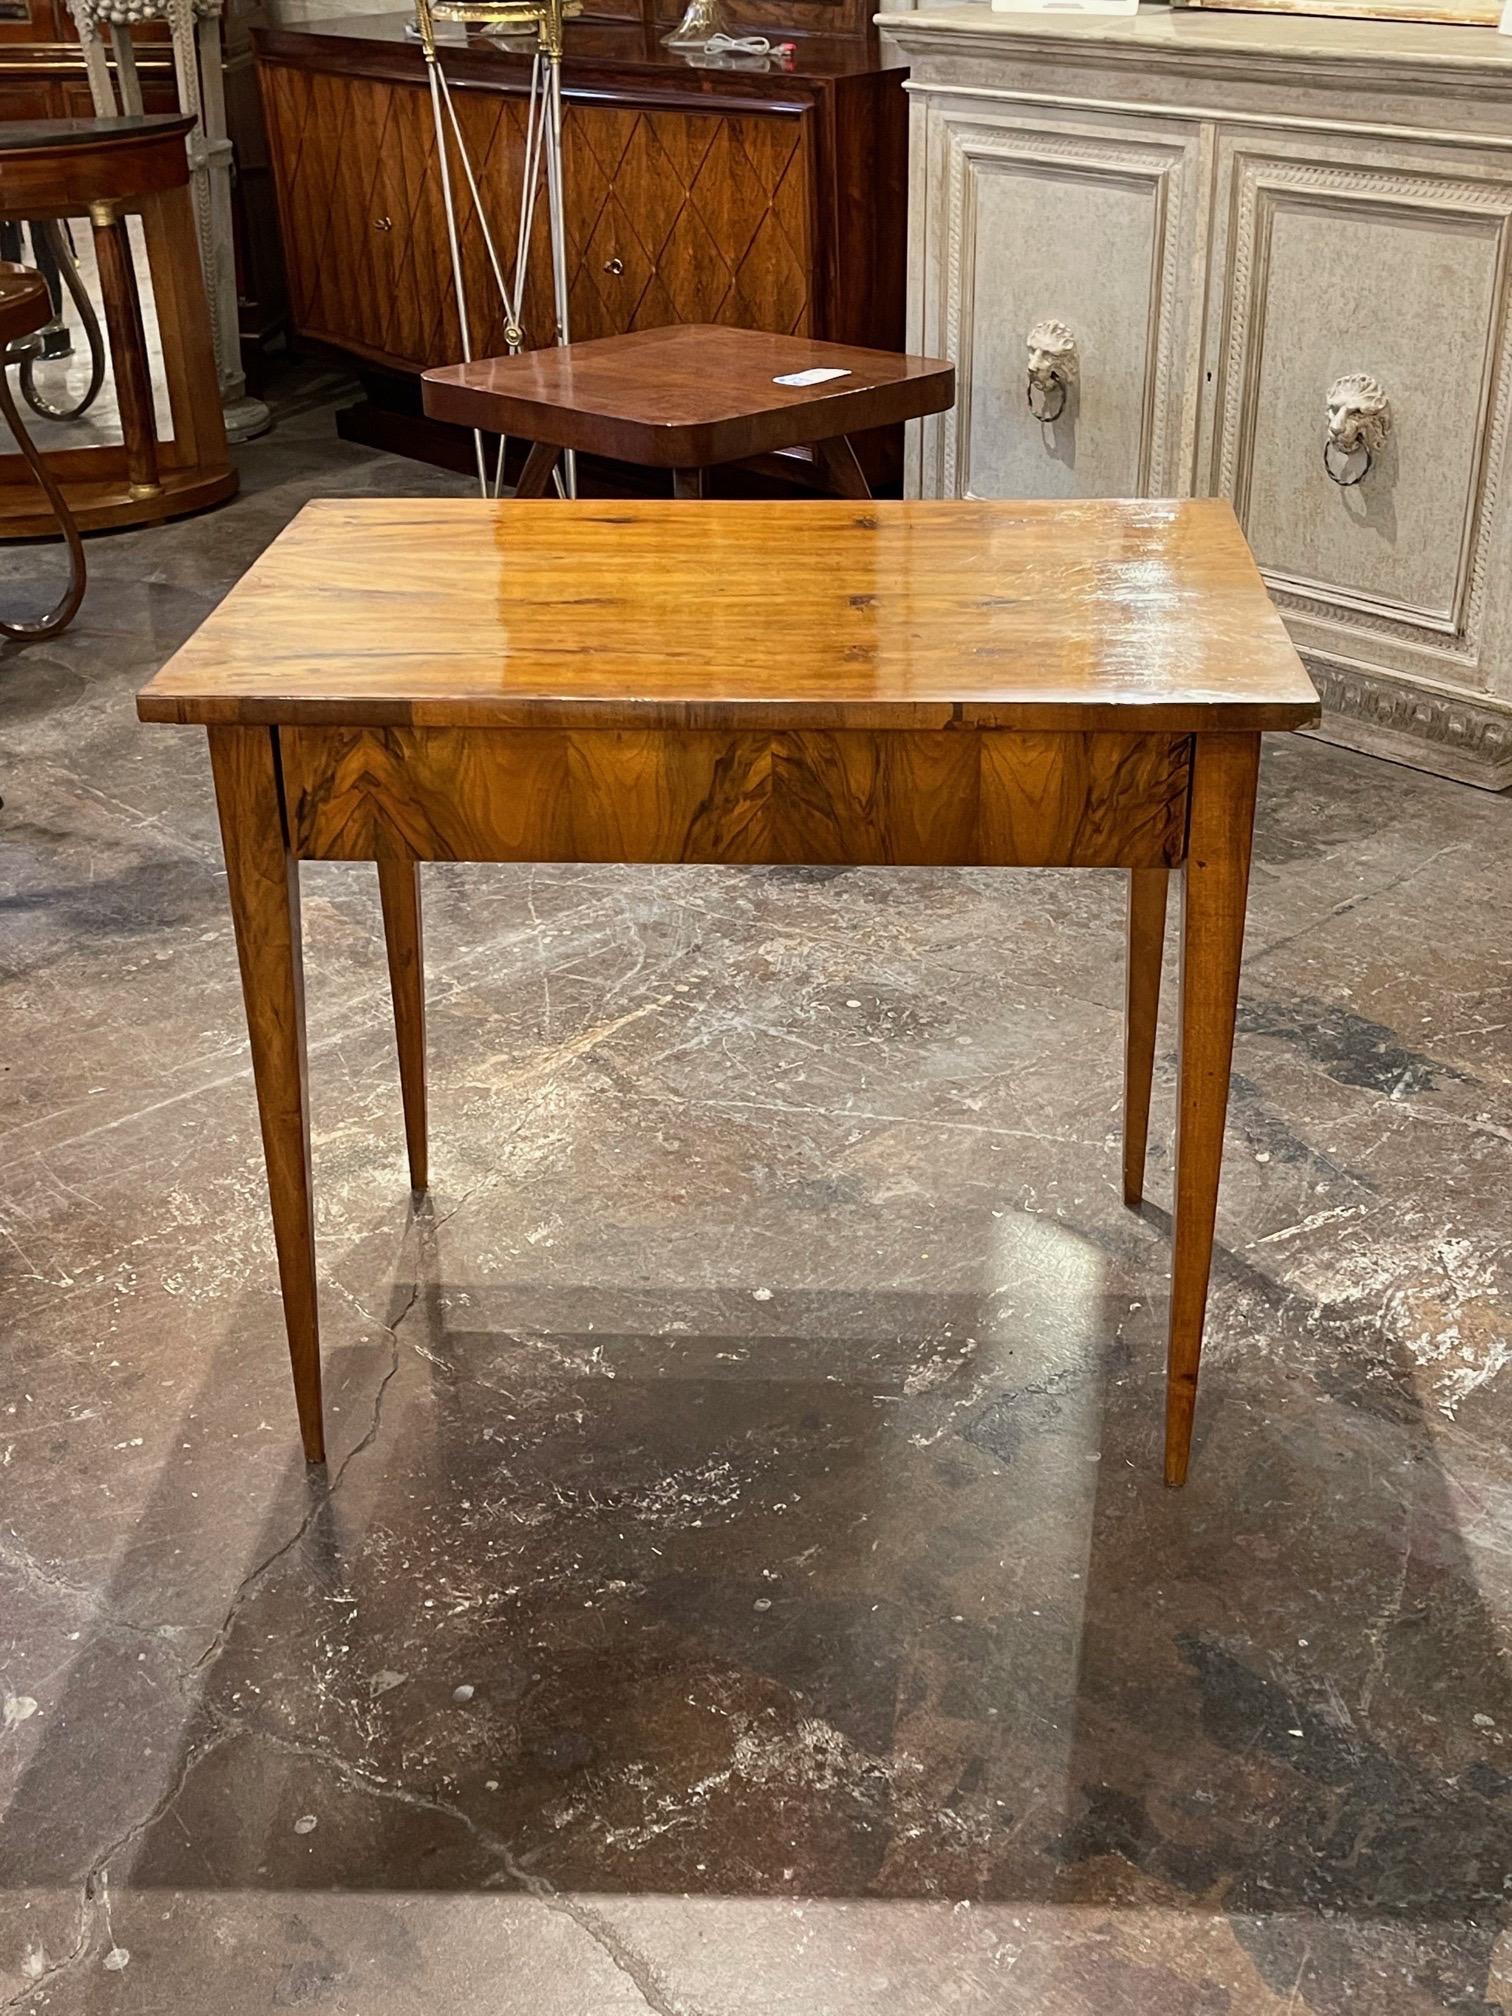 Handsome 19th century Italian walnut side table with one drawer. Beautiful polish on this lovely piece. A stylish addition!